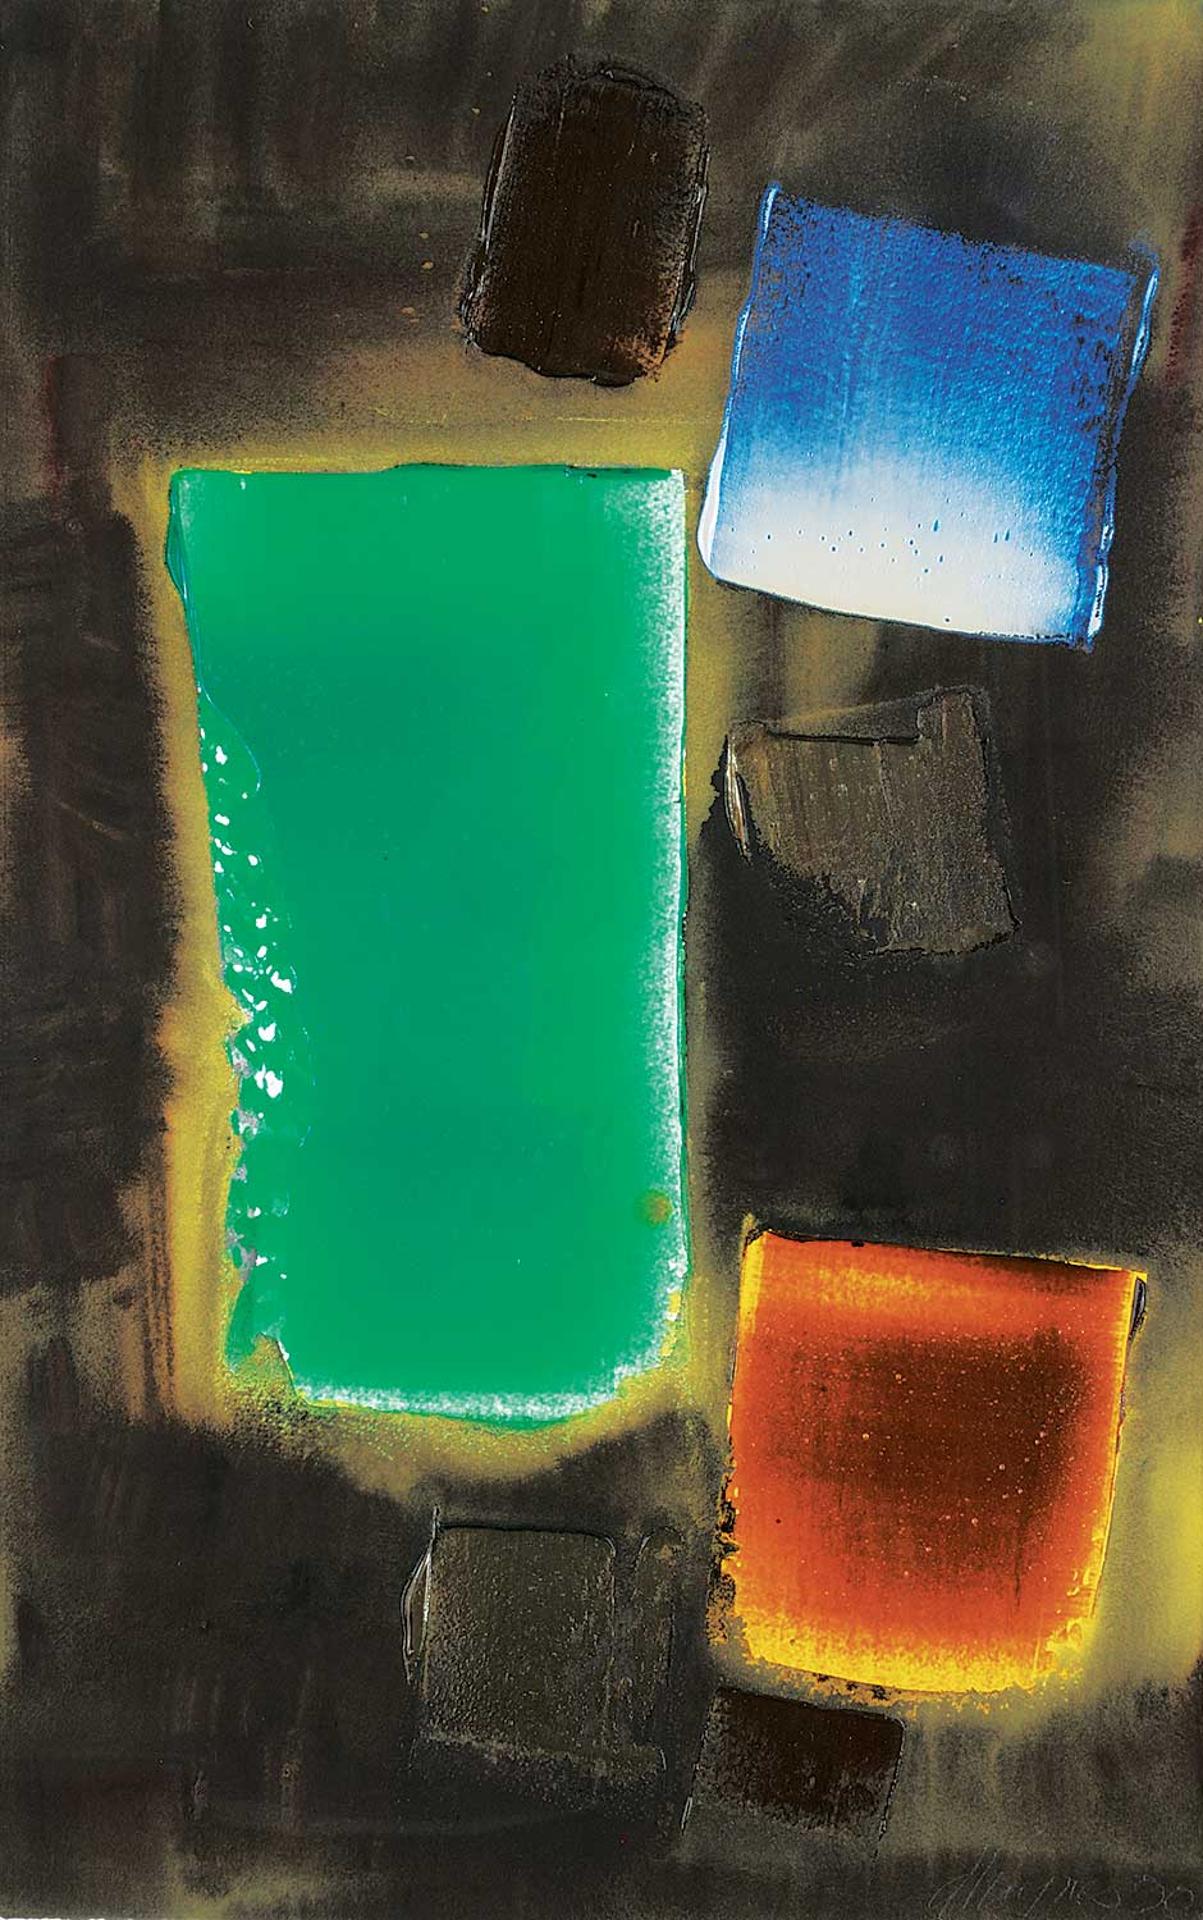 Douglas Hector Haynes (1936-2016) - Untitled - Abstract with Iridescence